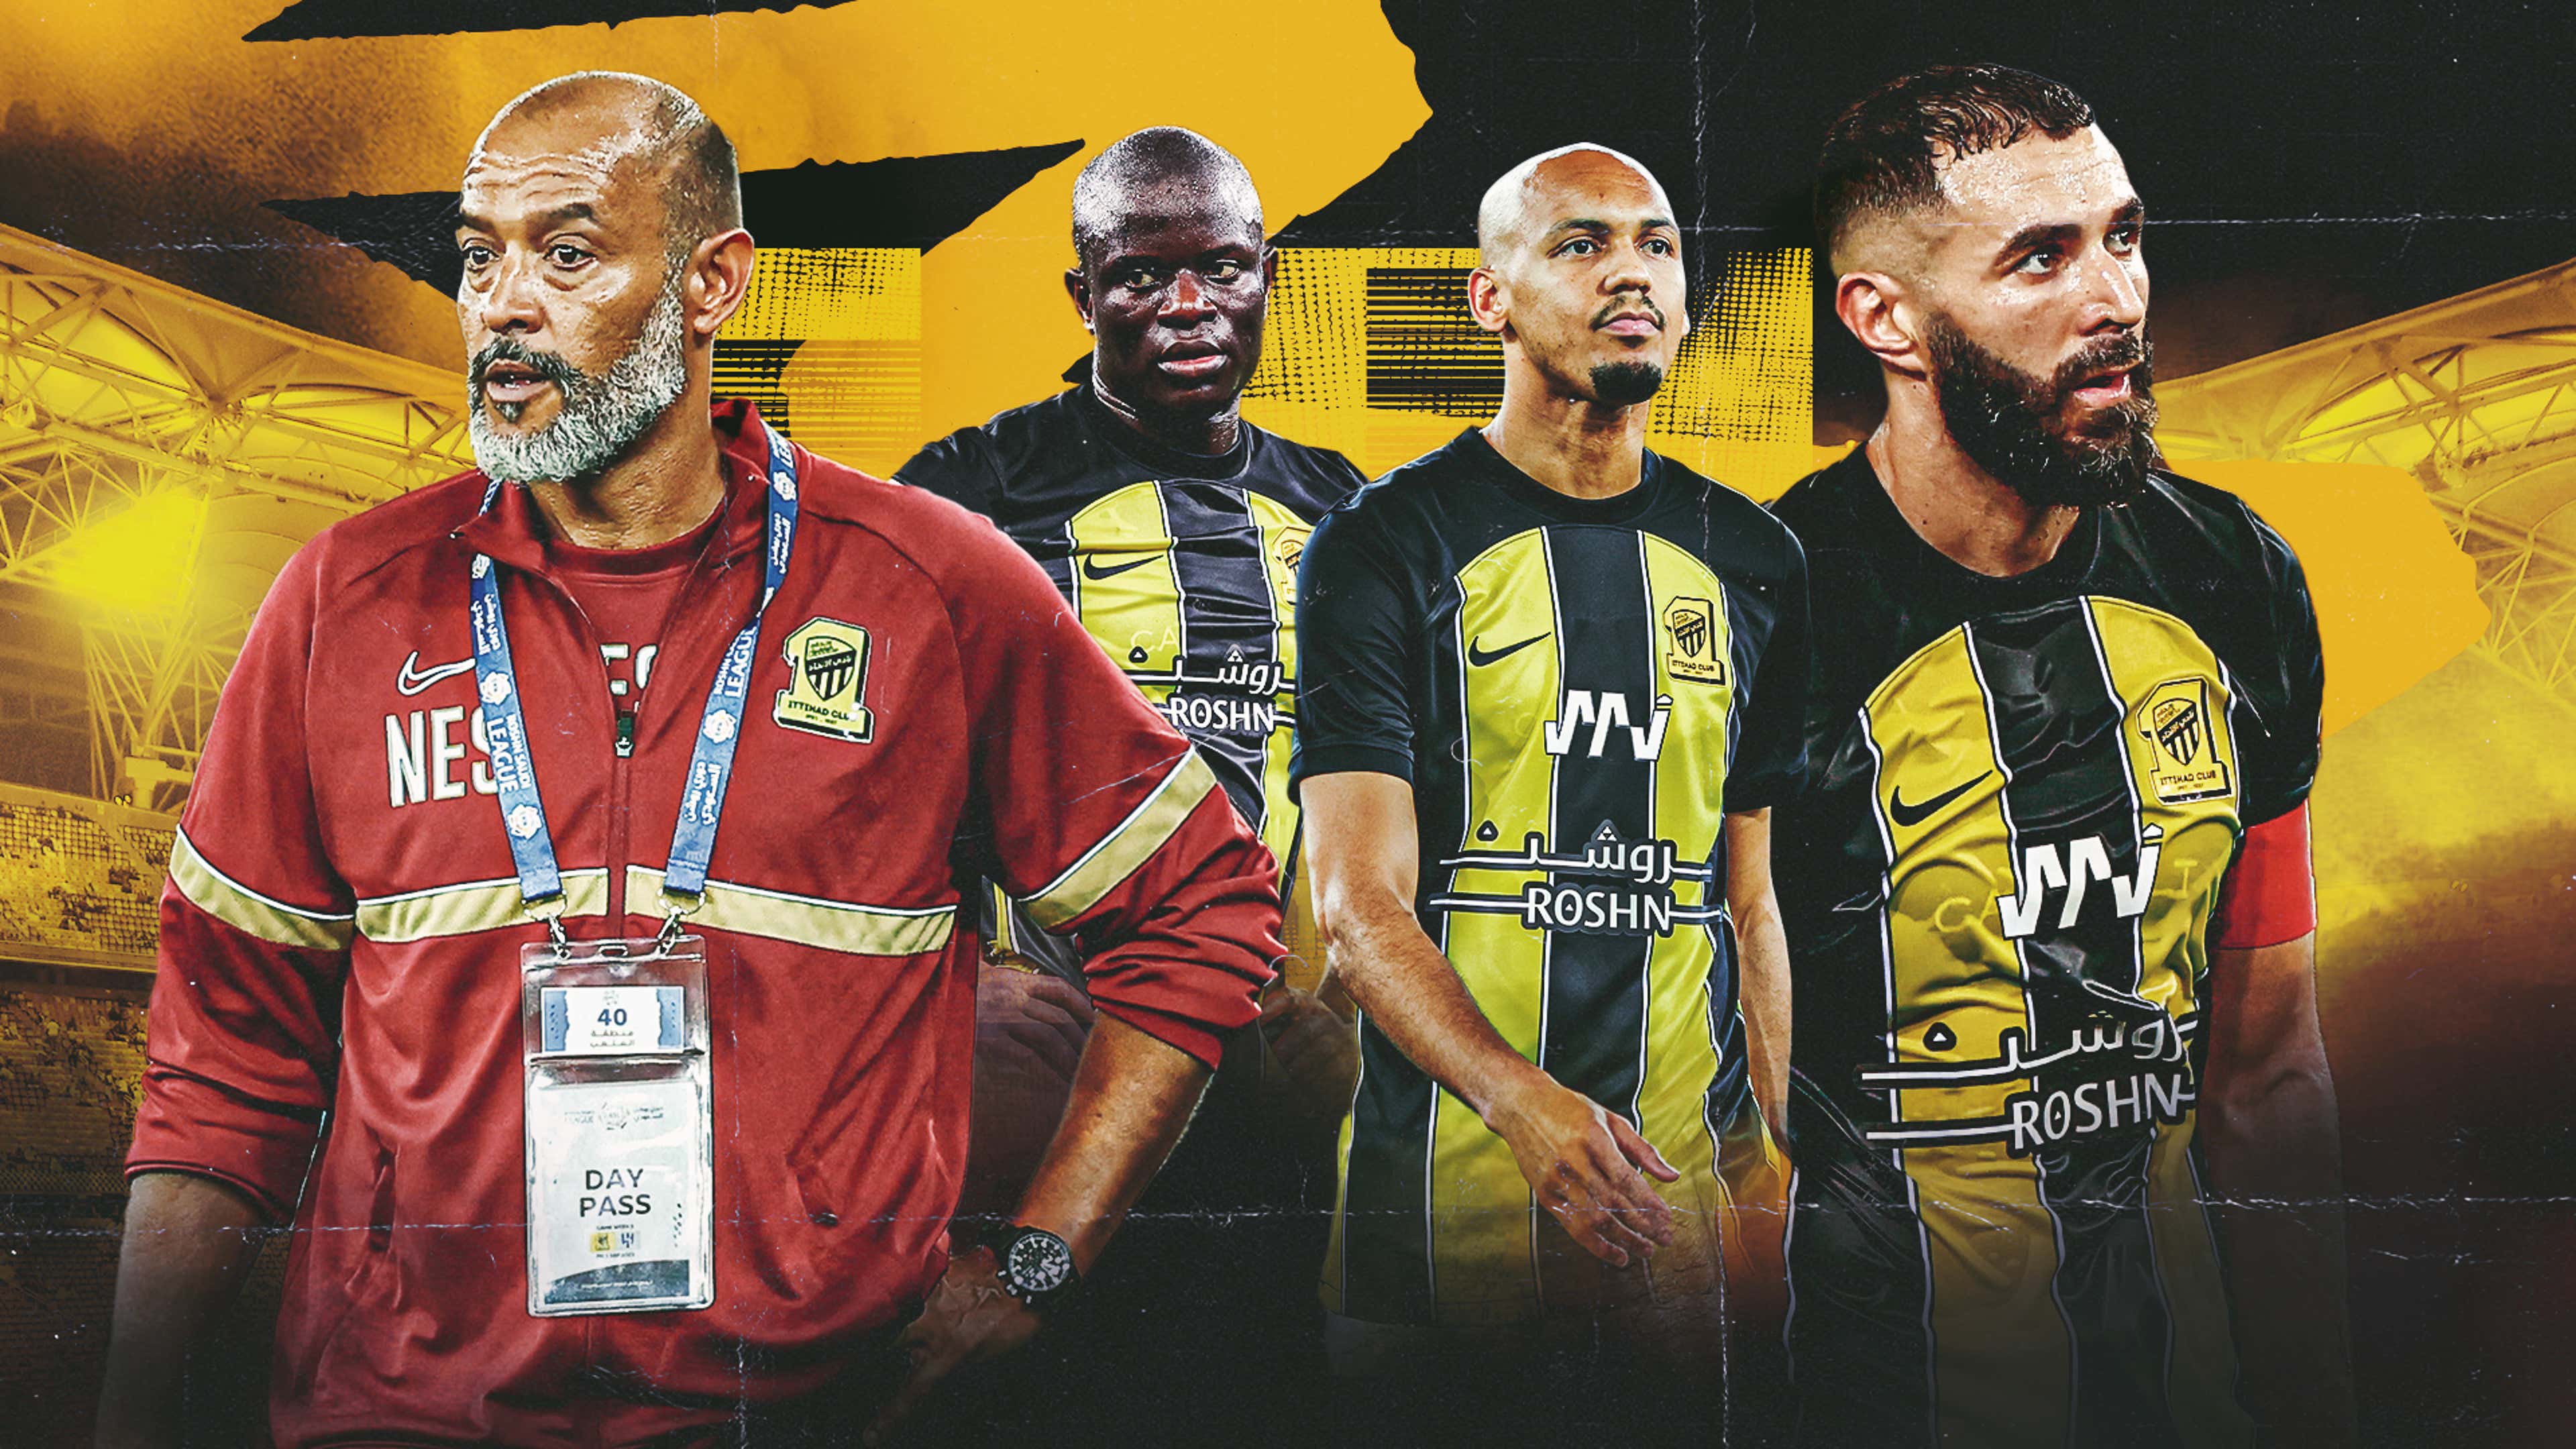 Al Ittihad secures top spot in AFC Champions League Group C with 2